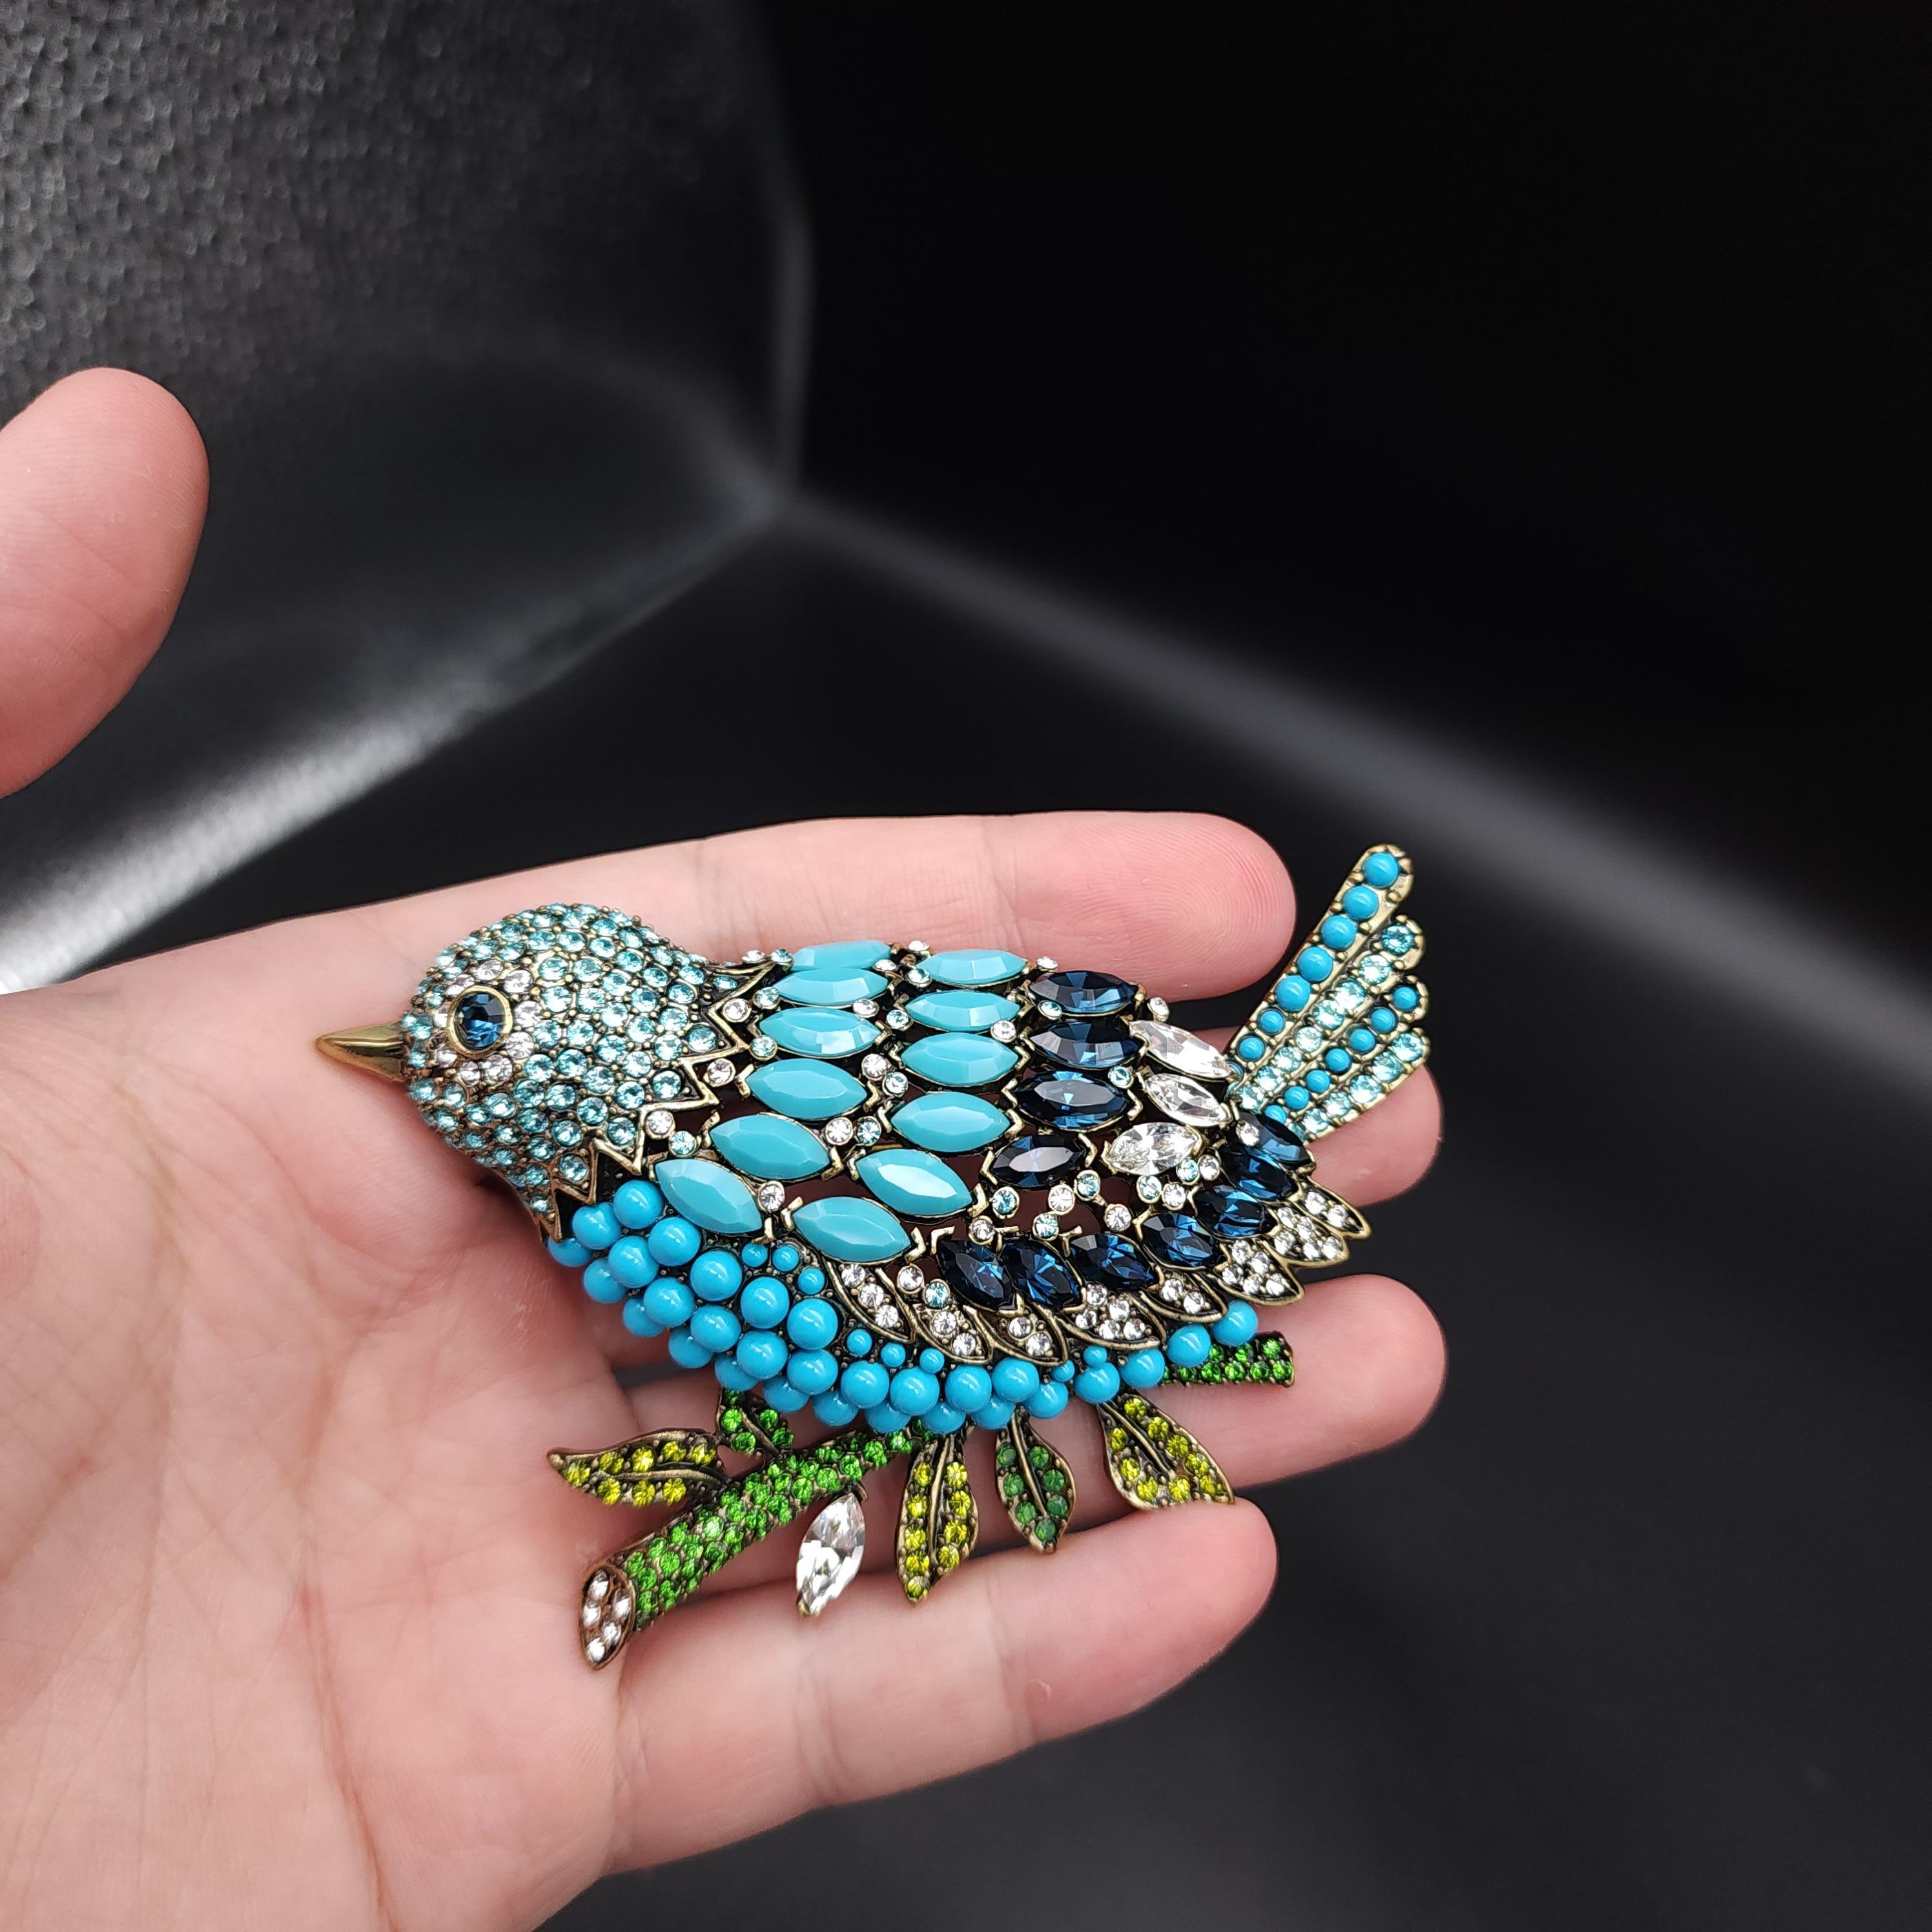 Take fashionable flight with this glamorous bird, adorned with turquoise crystals & cabochons, and perched on a jewel-encrusted branch with olivine, peridot, and jade colored crystals. 

Antique Brass Tone

Pin brooch by Heidi Daus.

Limited-time,